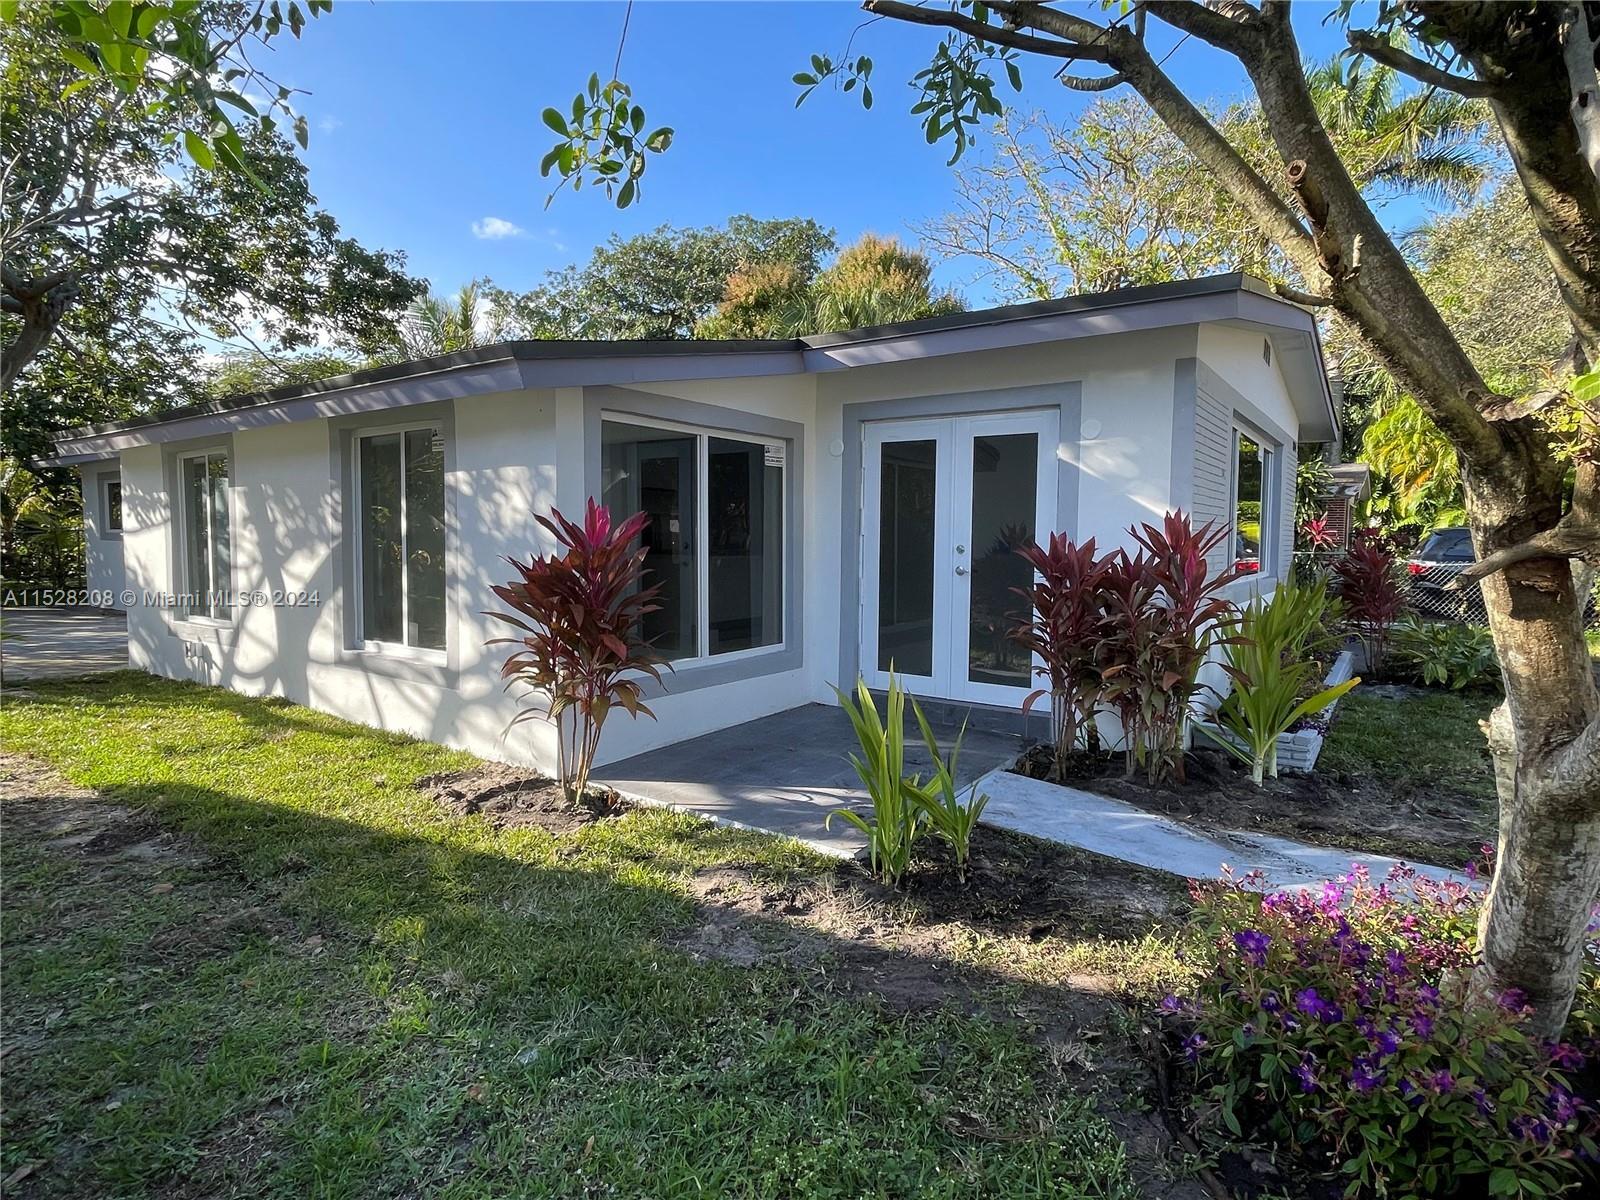 A True Gem in East Hollywood!  Completely remodeled 3 bedroom 2 bath Home with a den featuring moder